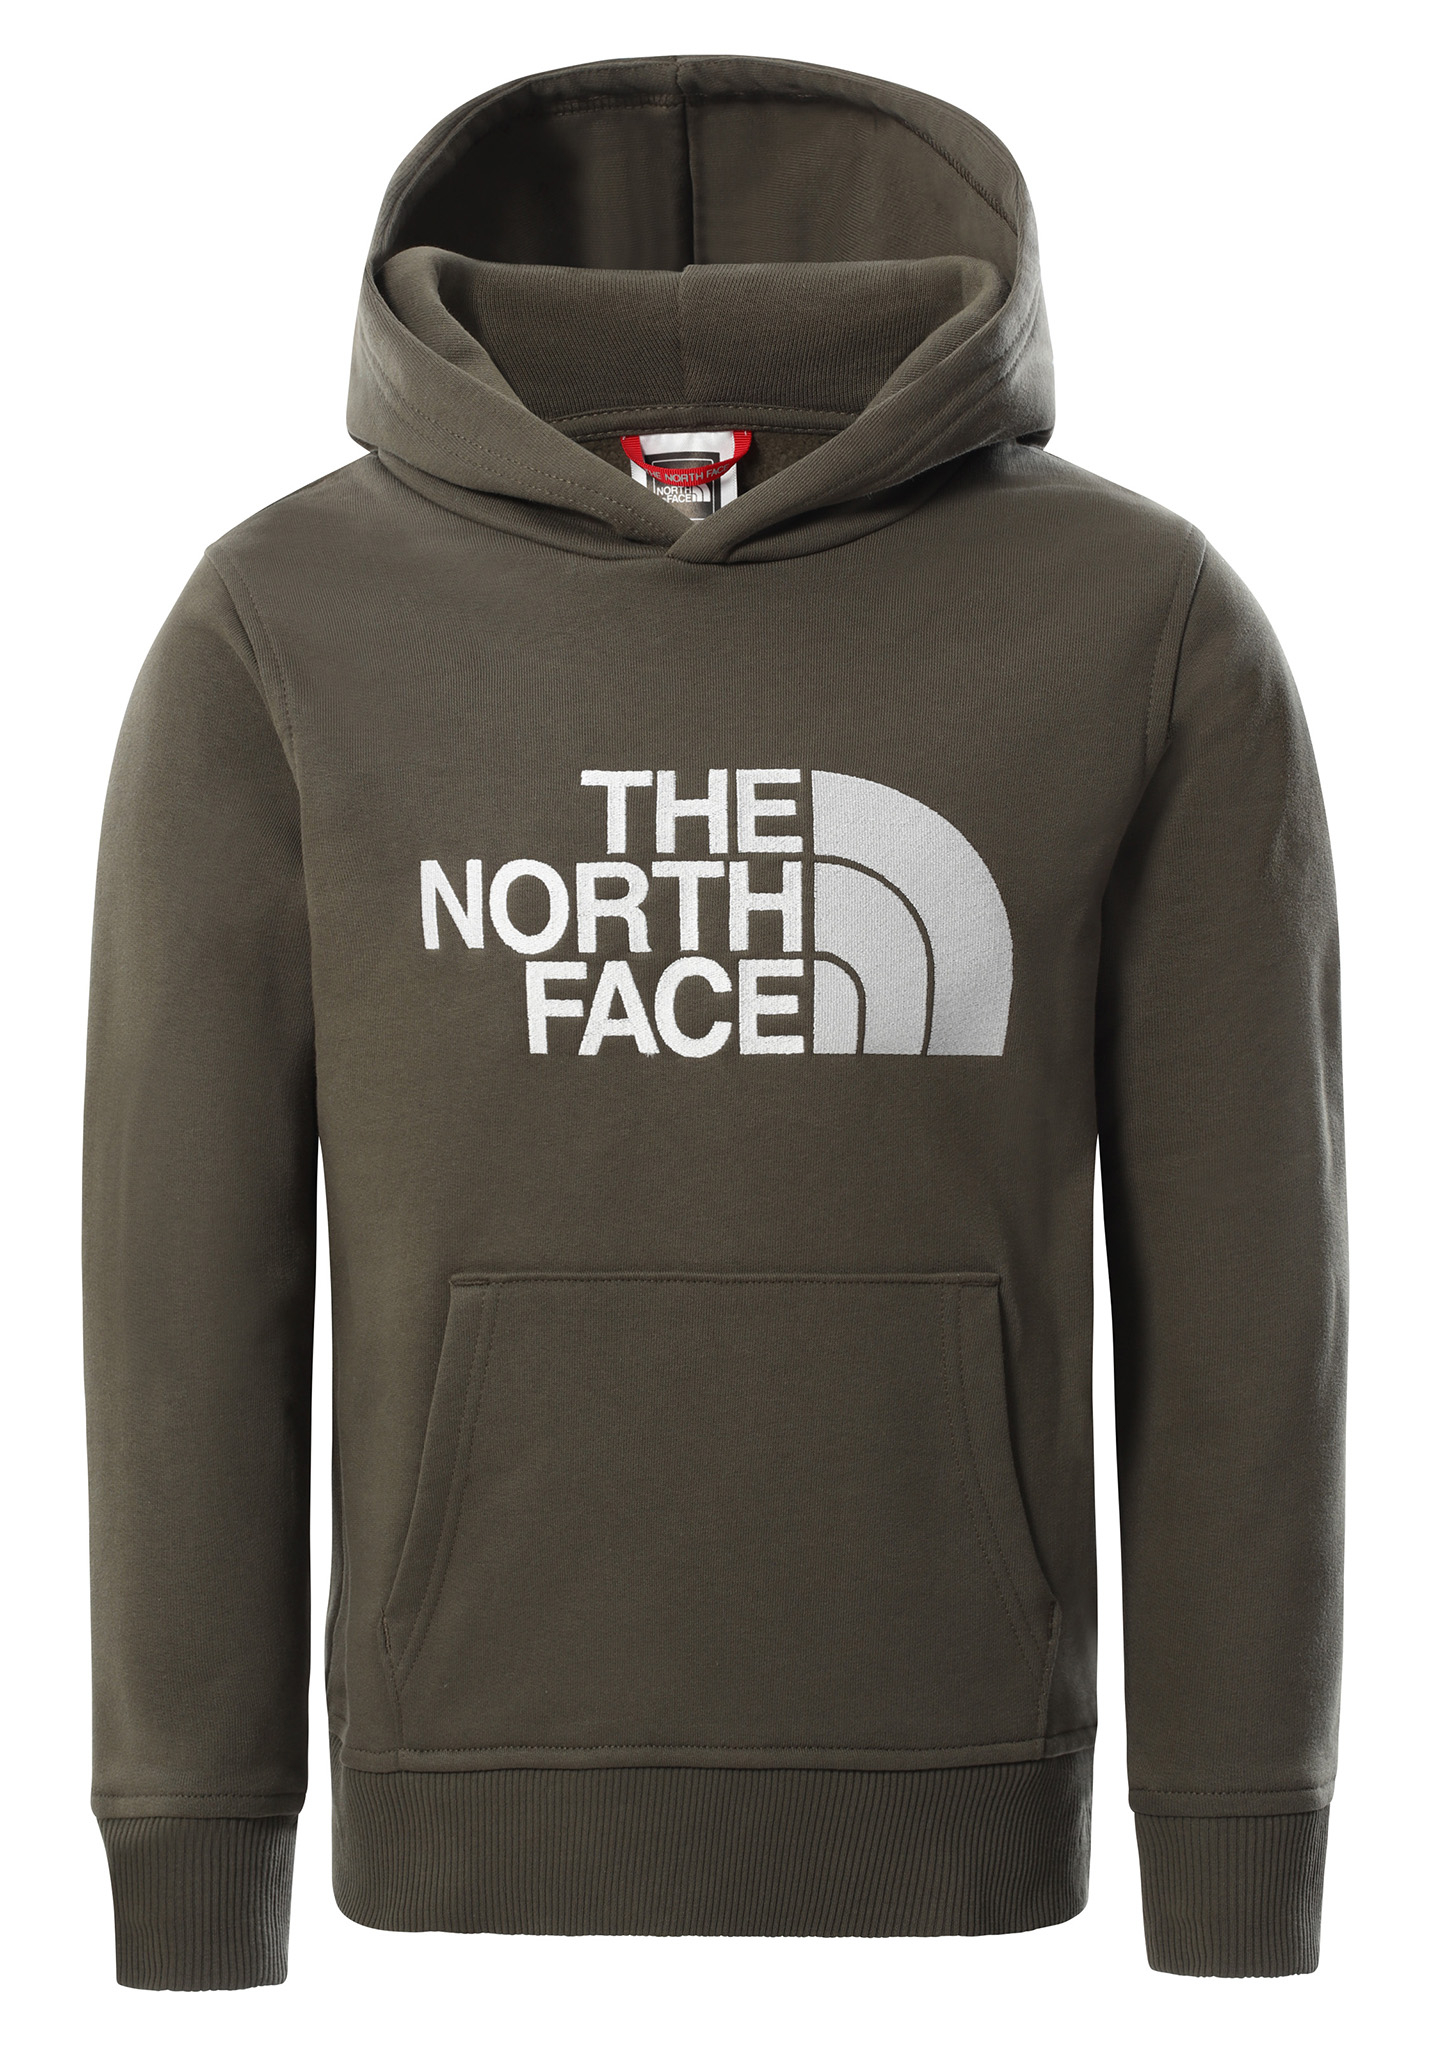 The North Face Drew Peak Hoodie forest XL